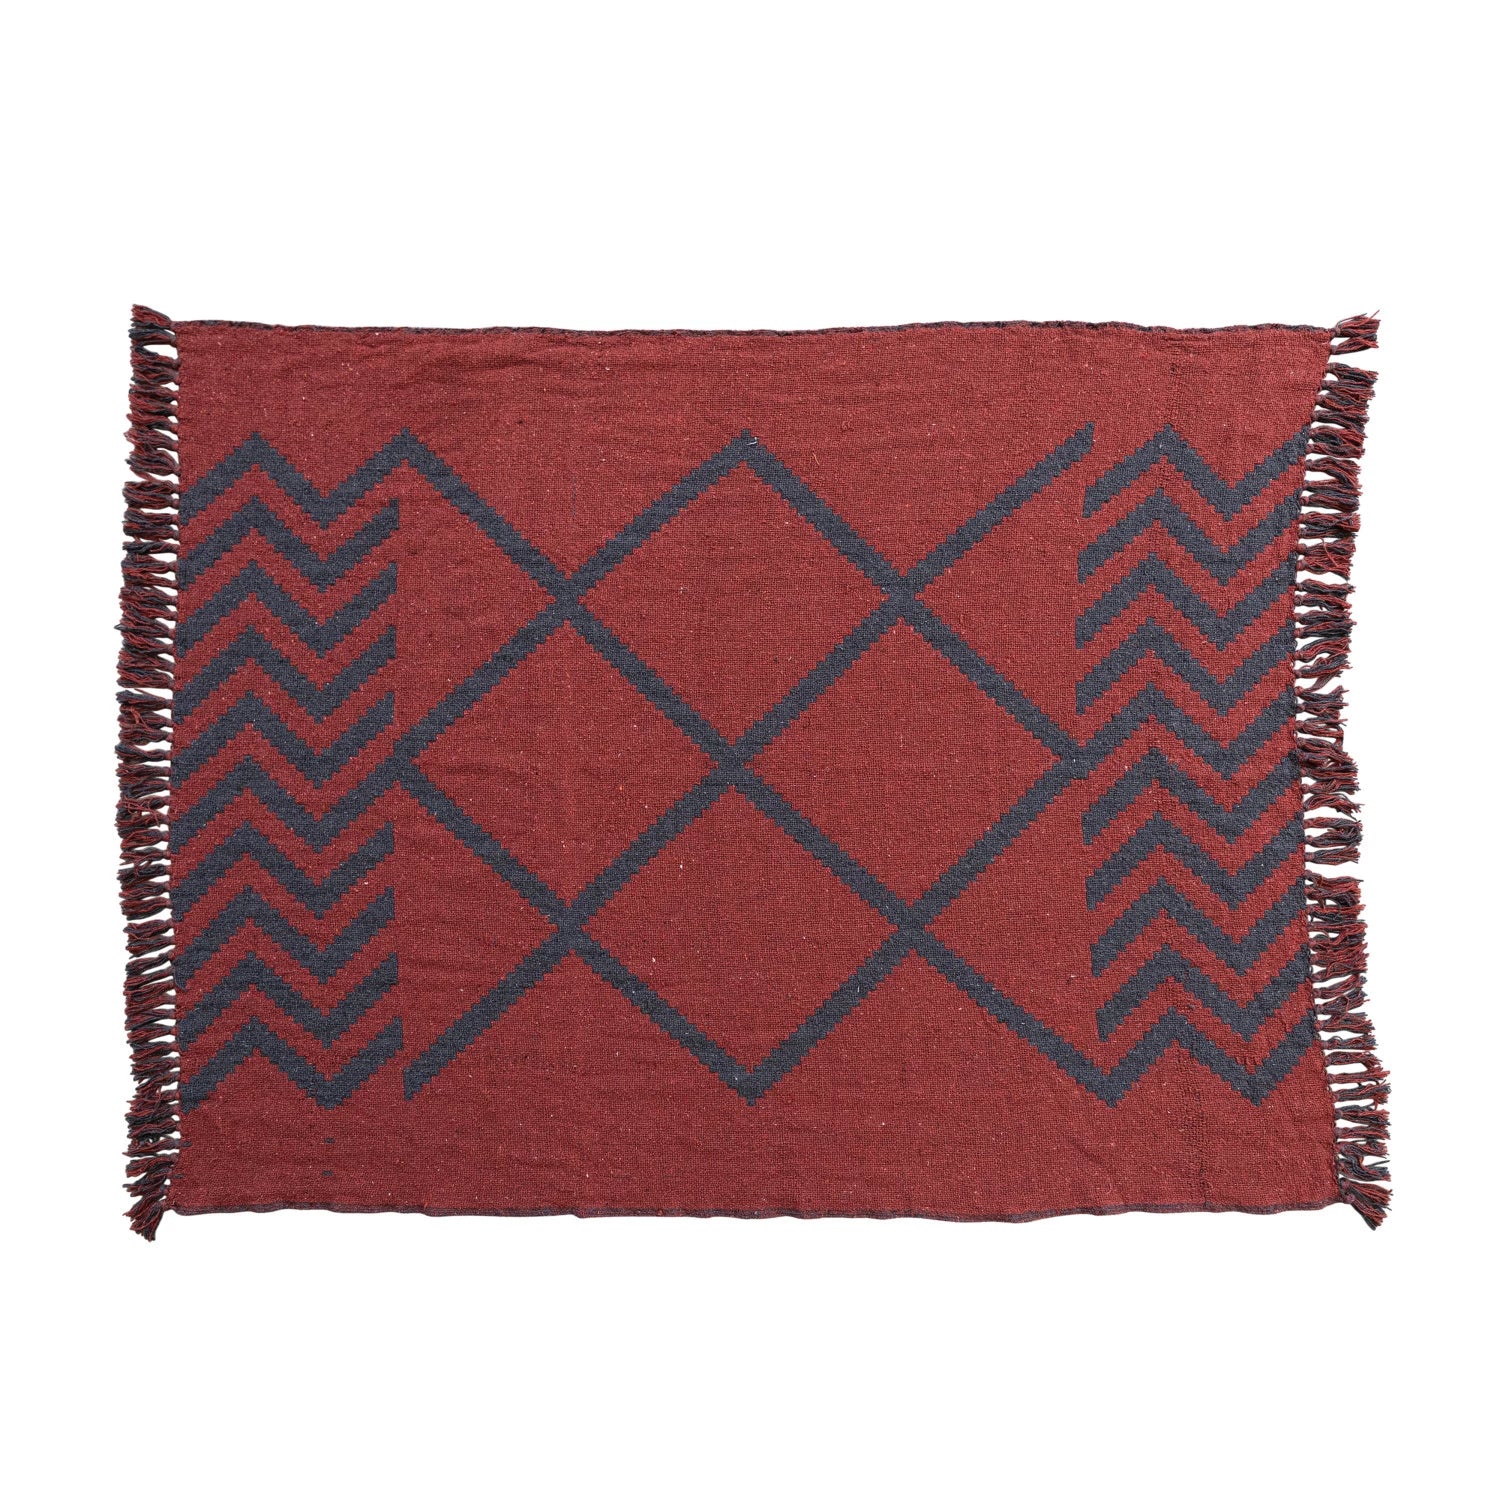 Recycled Cotton Blend Throw w/ Design & Fringe | Red & Navy